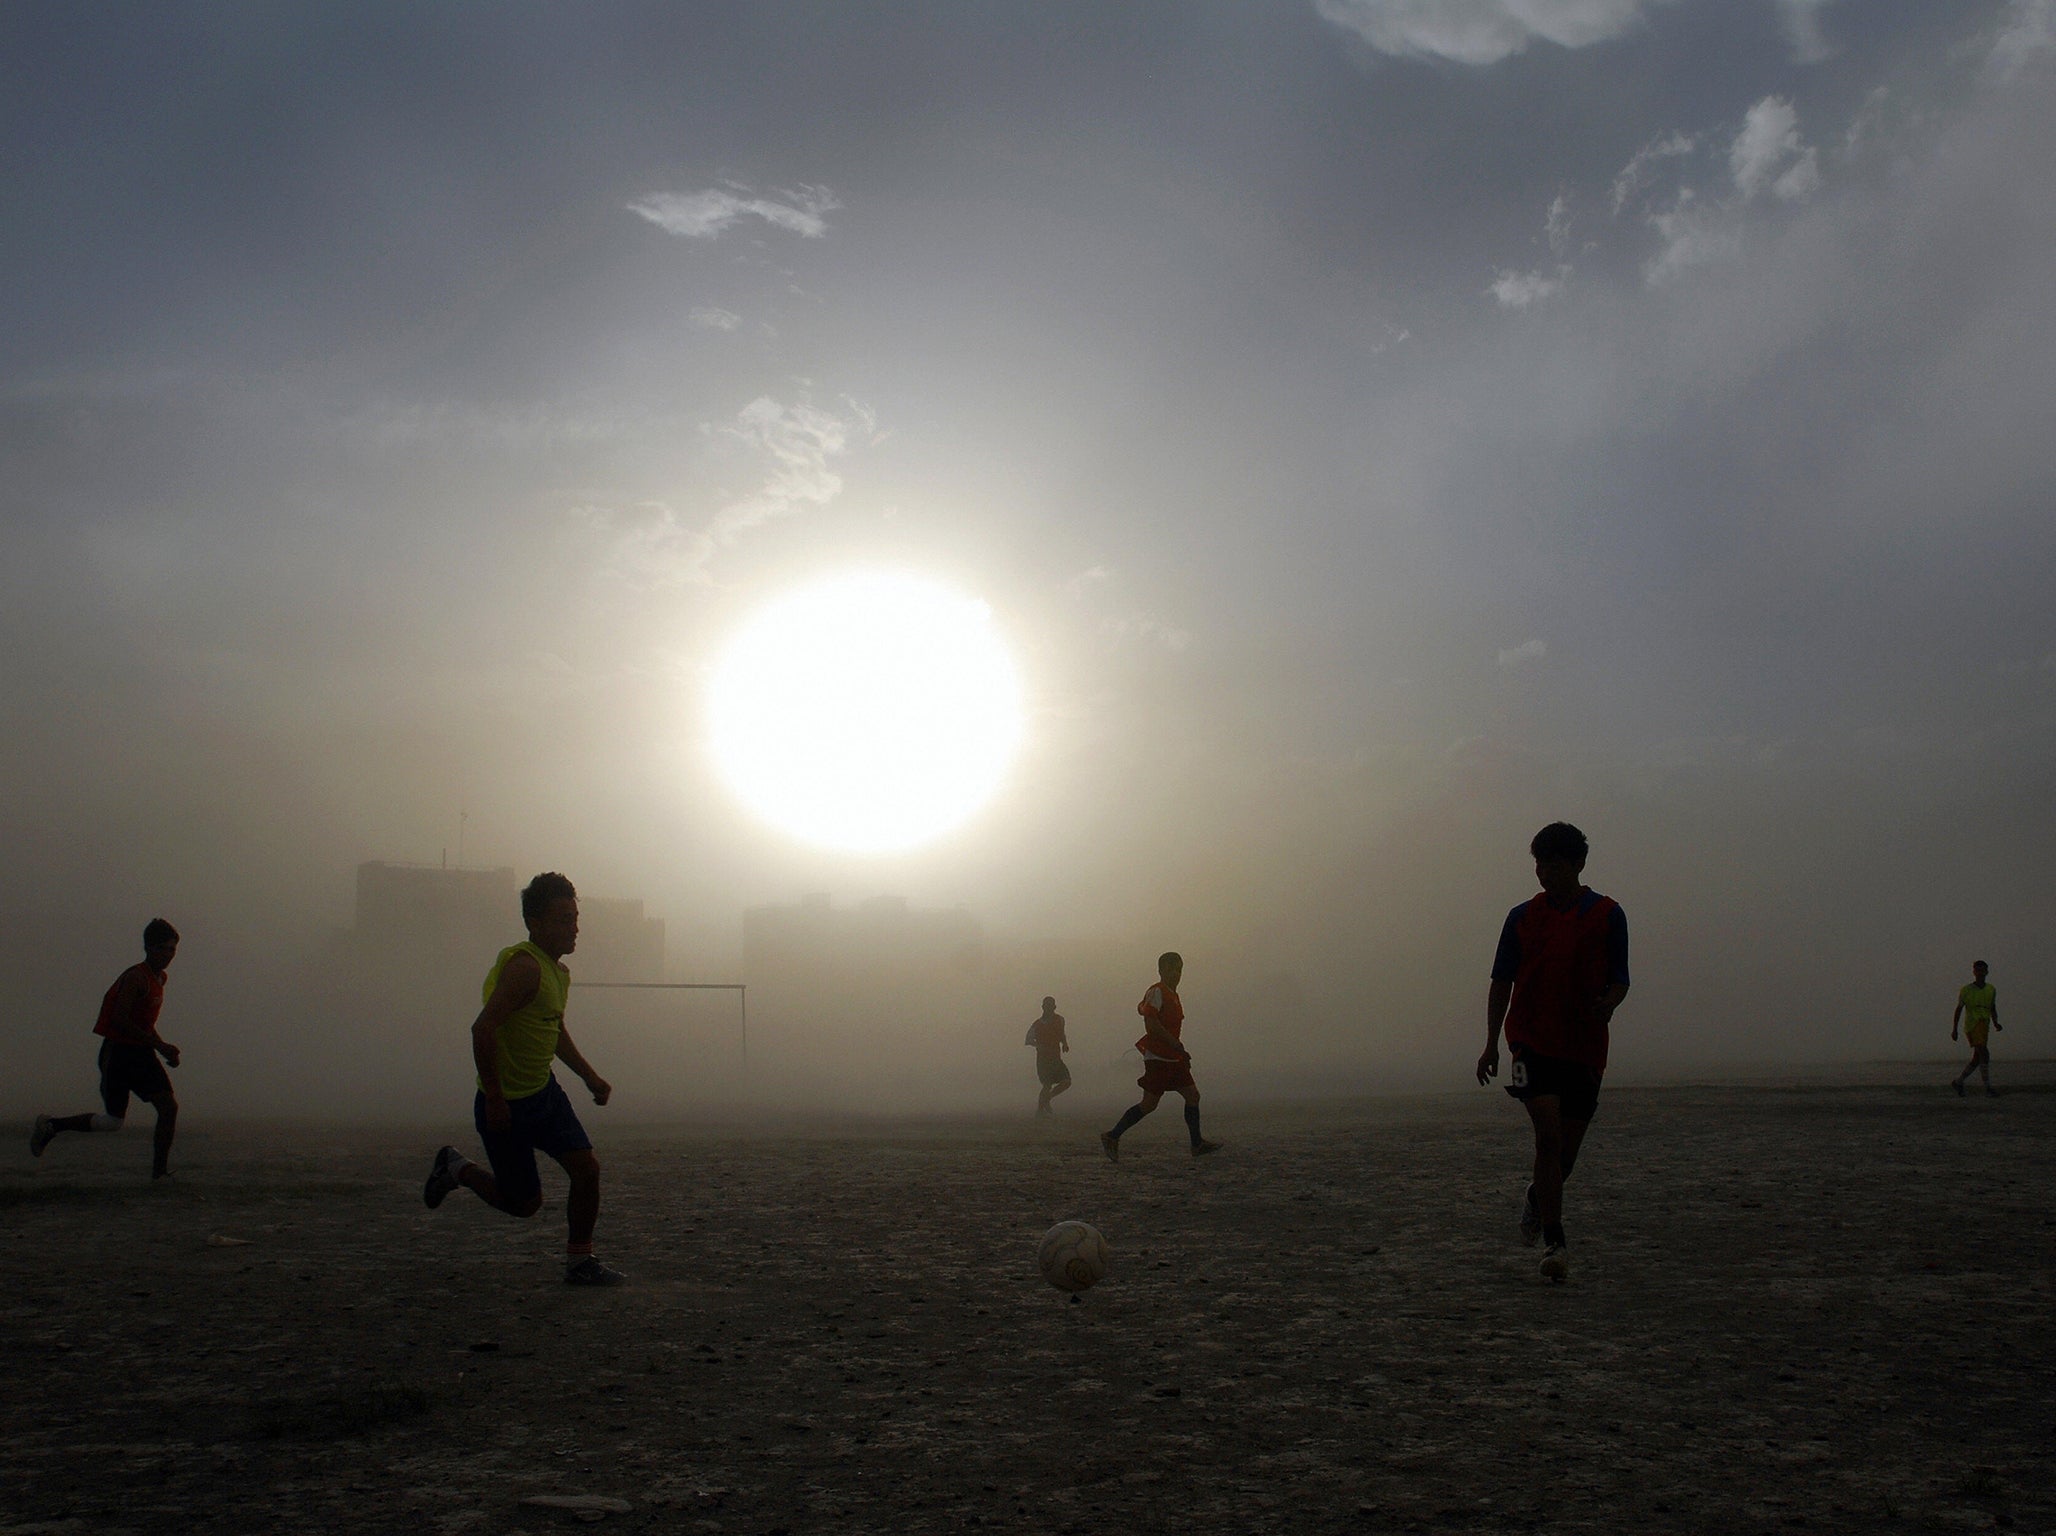 Football in Afghanistan was forbidden under the Taliban